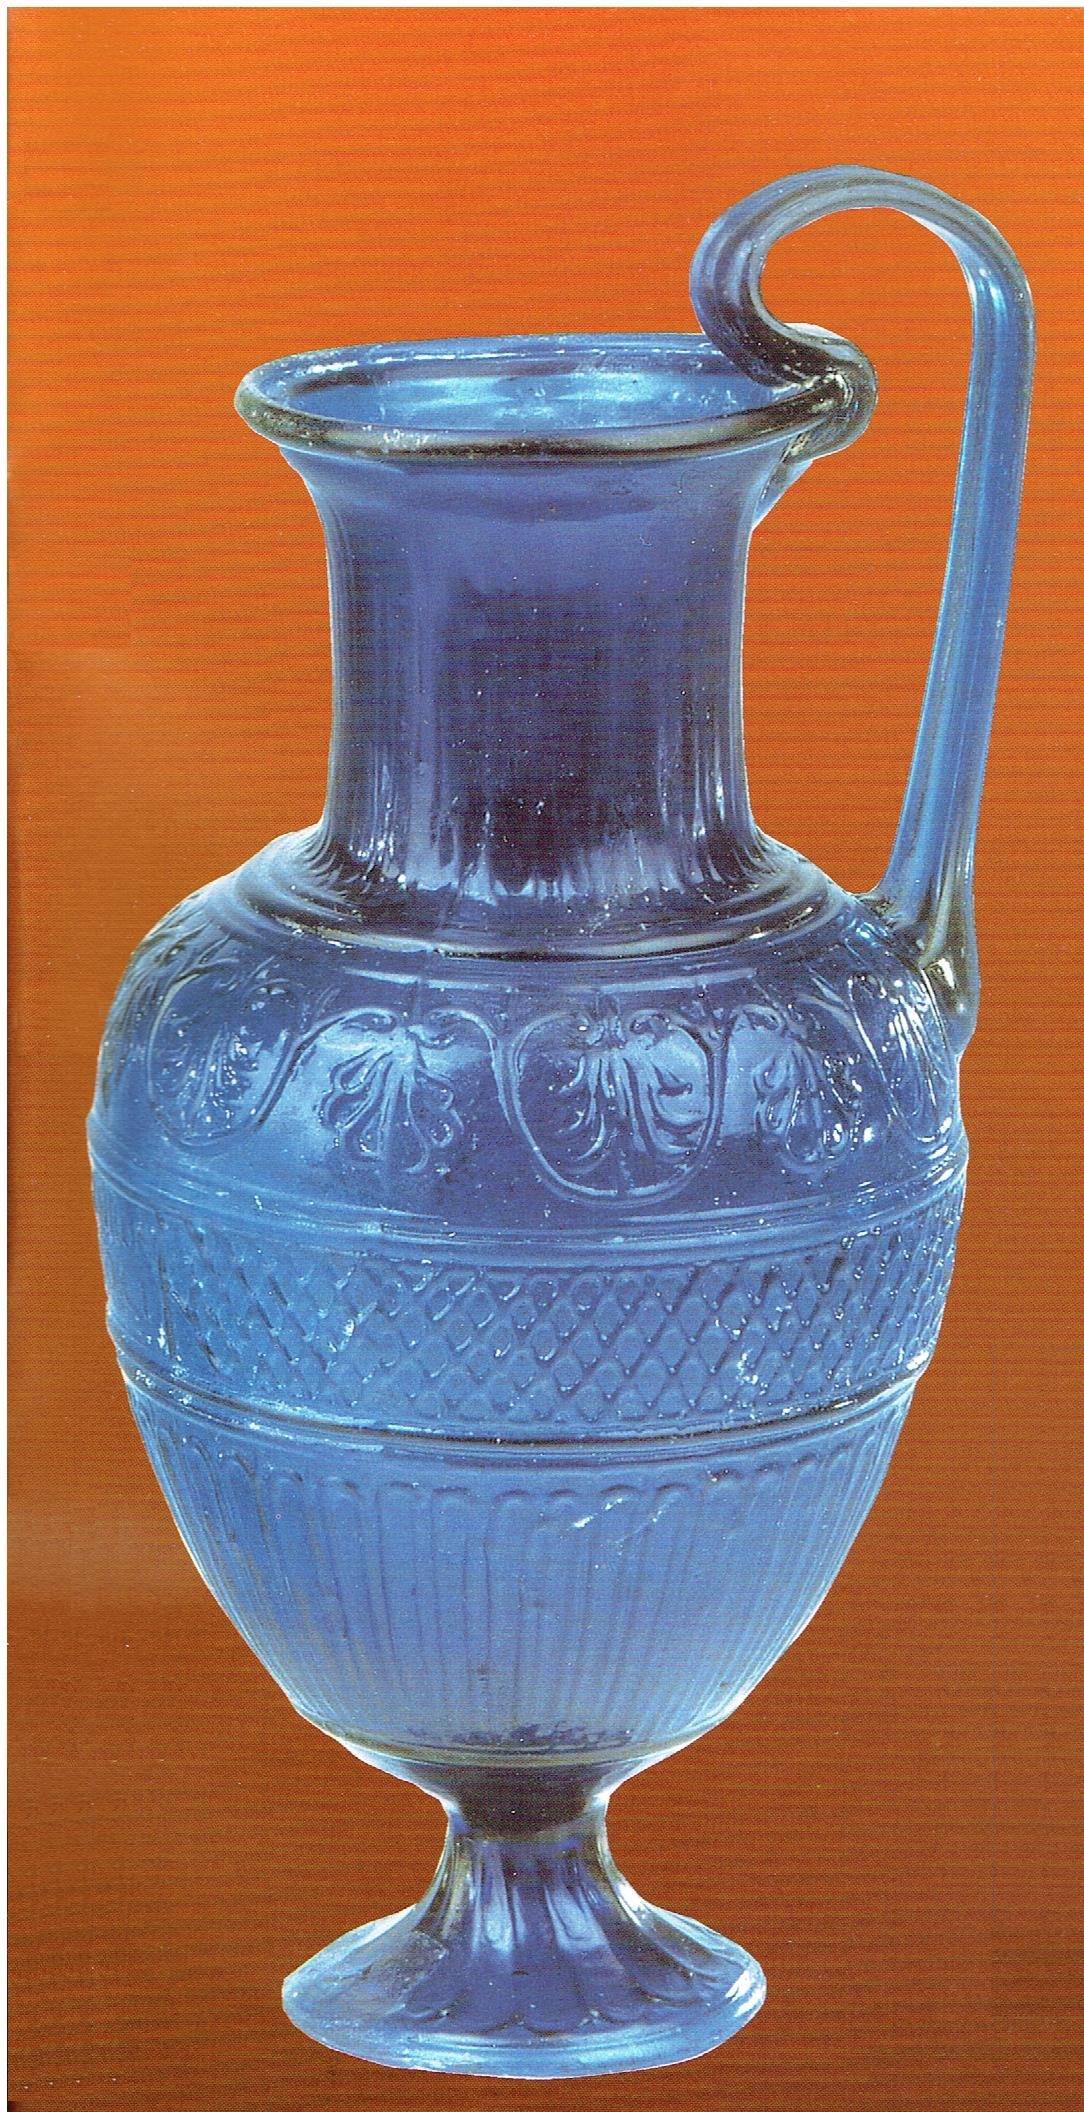 This perfectly preserved copy of the pitcher in the previous photo, thought to have been found in Jerusalem and smuggled out of Israel, turned up on the antiquities market in New York and was purchased by a private collector. The height of the pitcher, including its handle, is 22 cm. (Glass Pavilion, Eretz Israel Museum, Tel-Aviv)